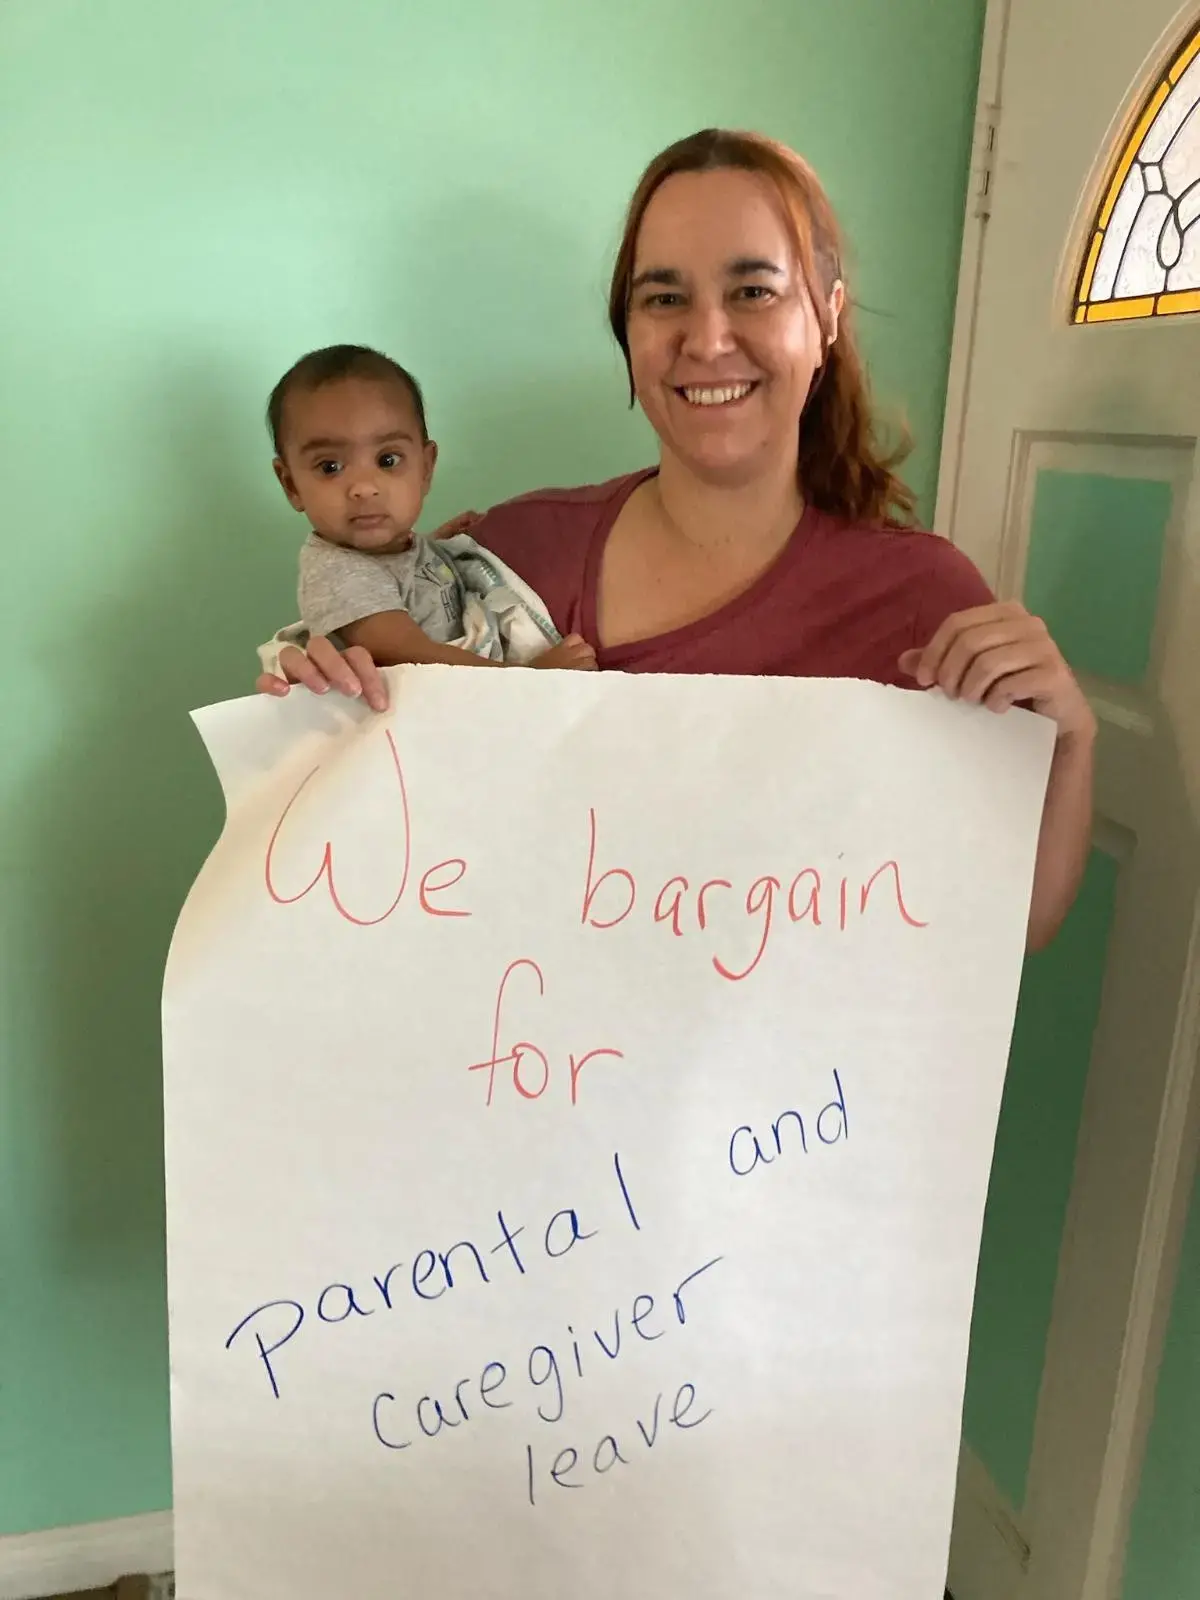 CFA member poses with child and holding a sign that says "We bargain for parental leave and caregiver leave."